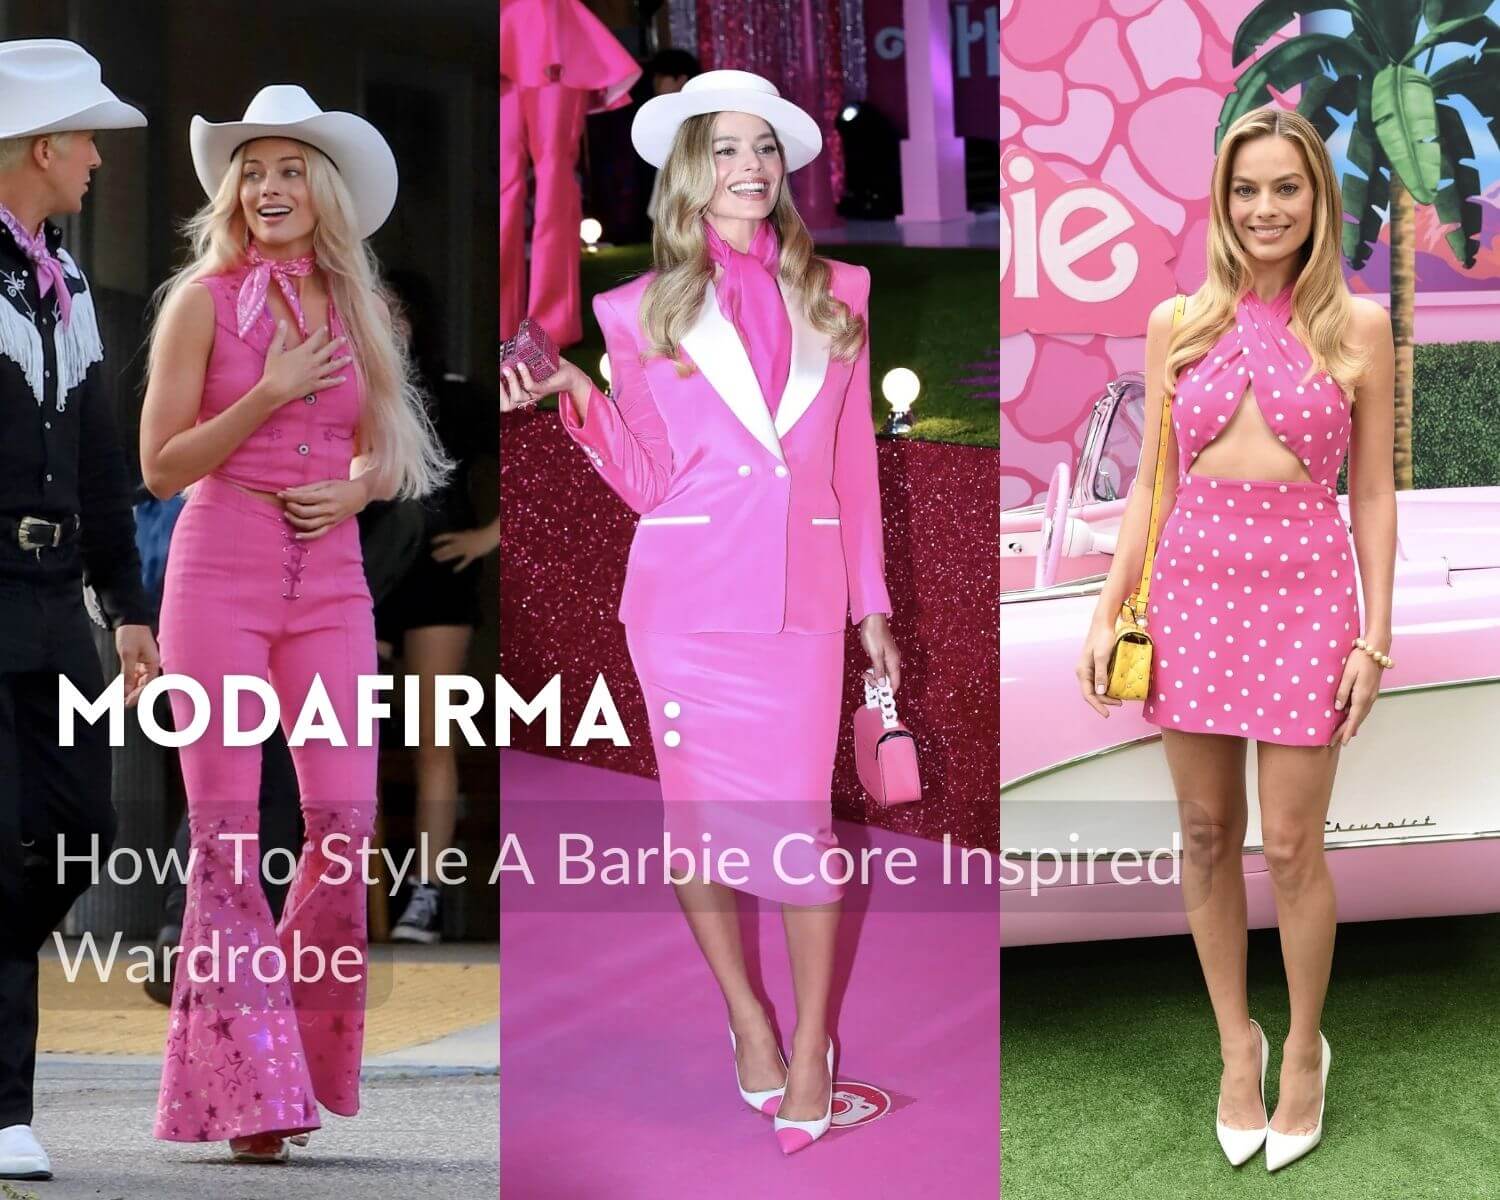 How To Style A Barbiecore Inspired Wardrobe